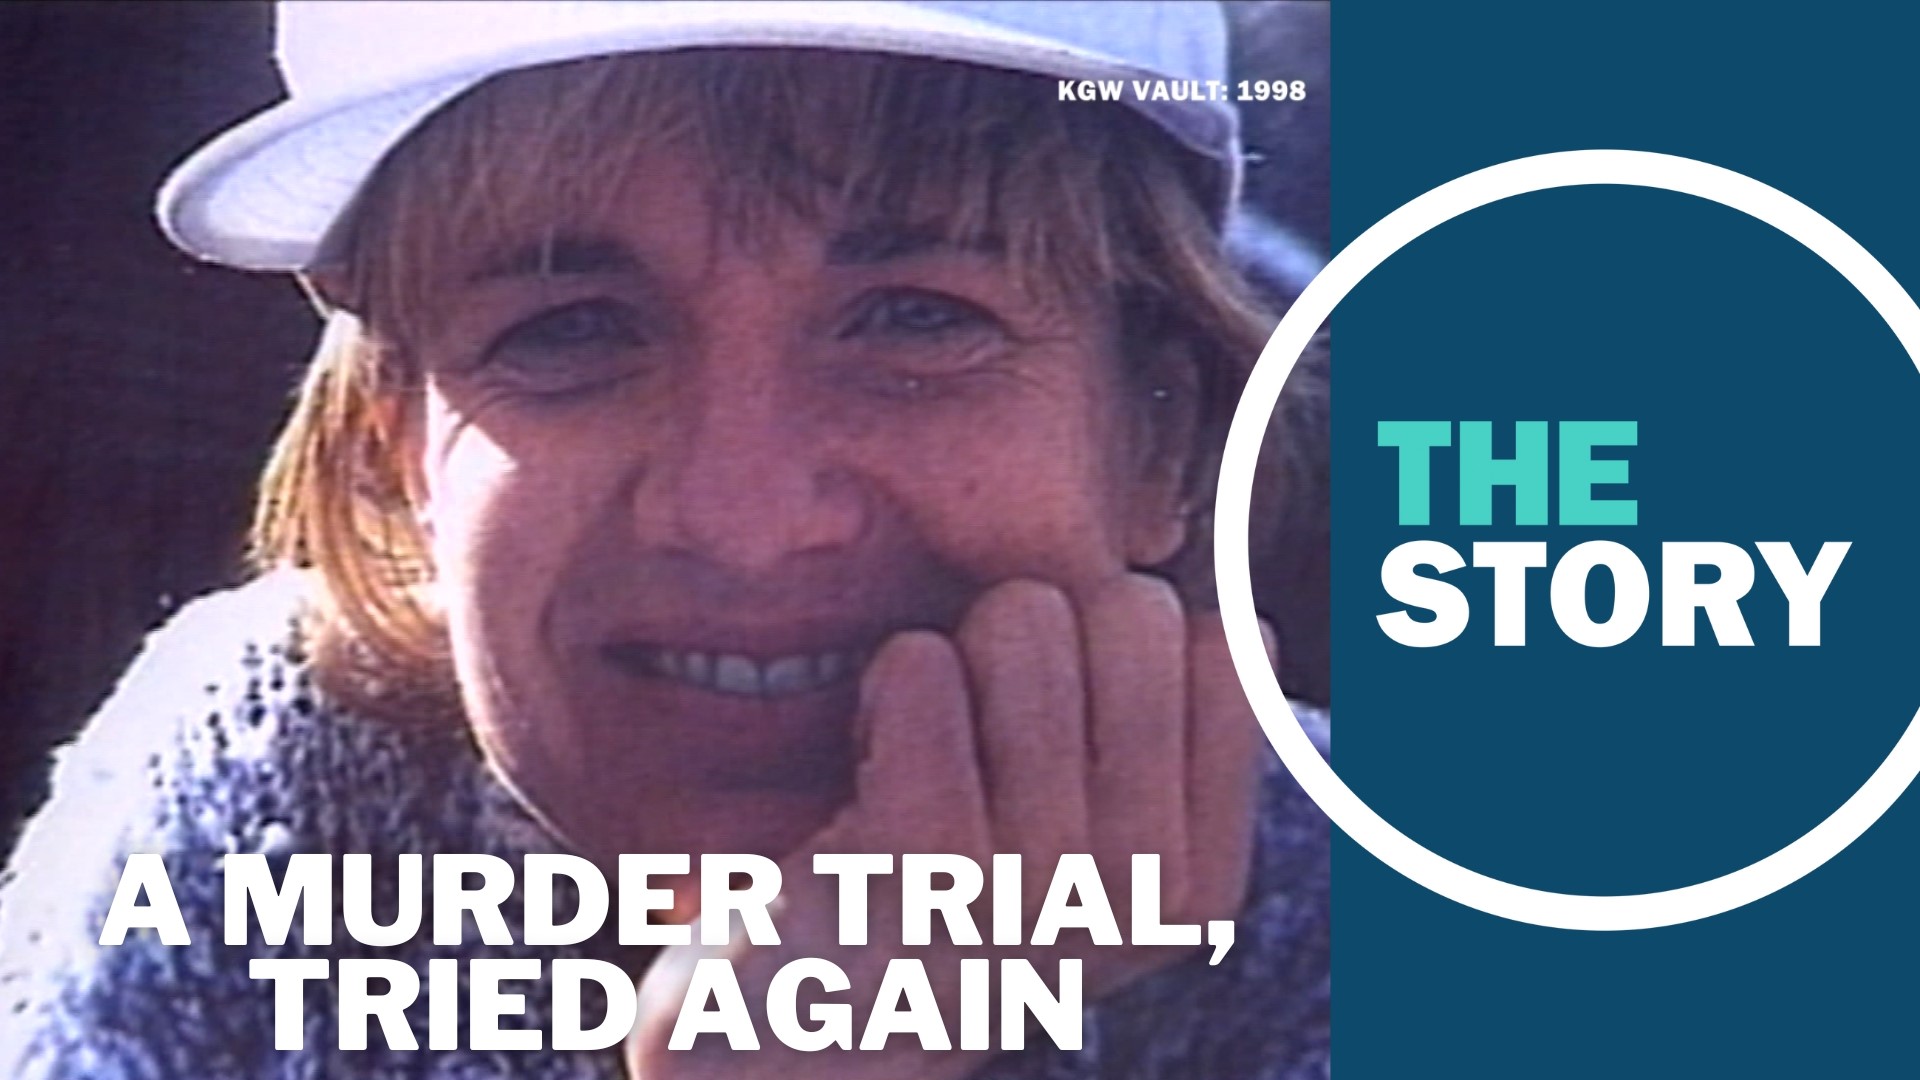 Billy Oatney was convicted of Susi Larsen’s murder decades ago. But an appeals court tossed out that conviction, necessitating a new trial.